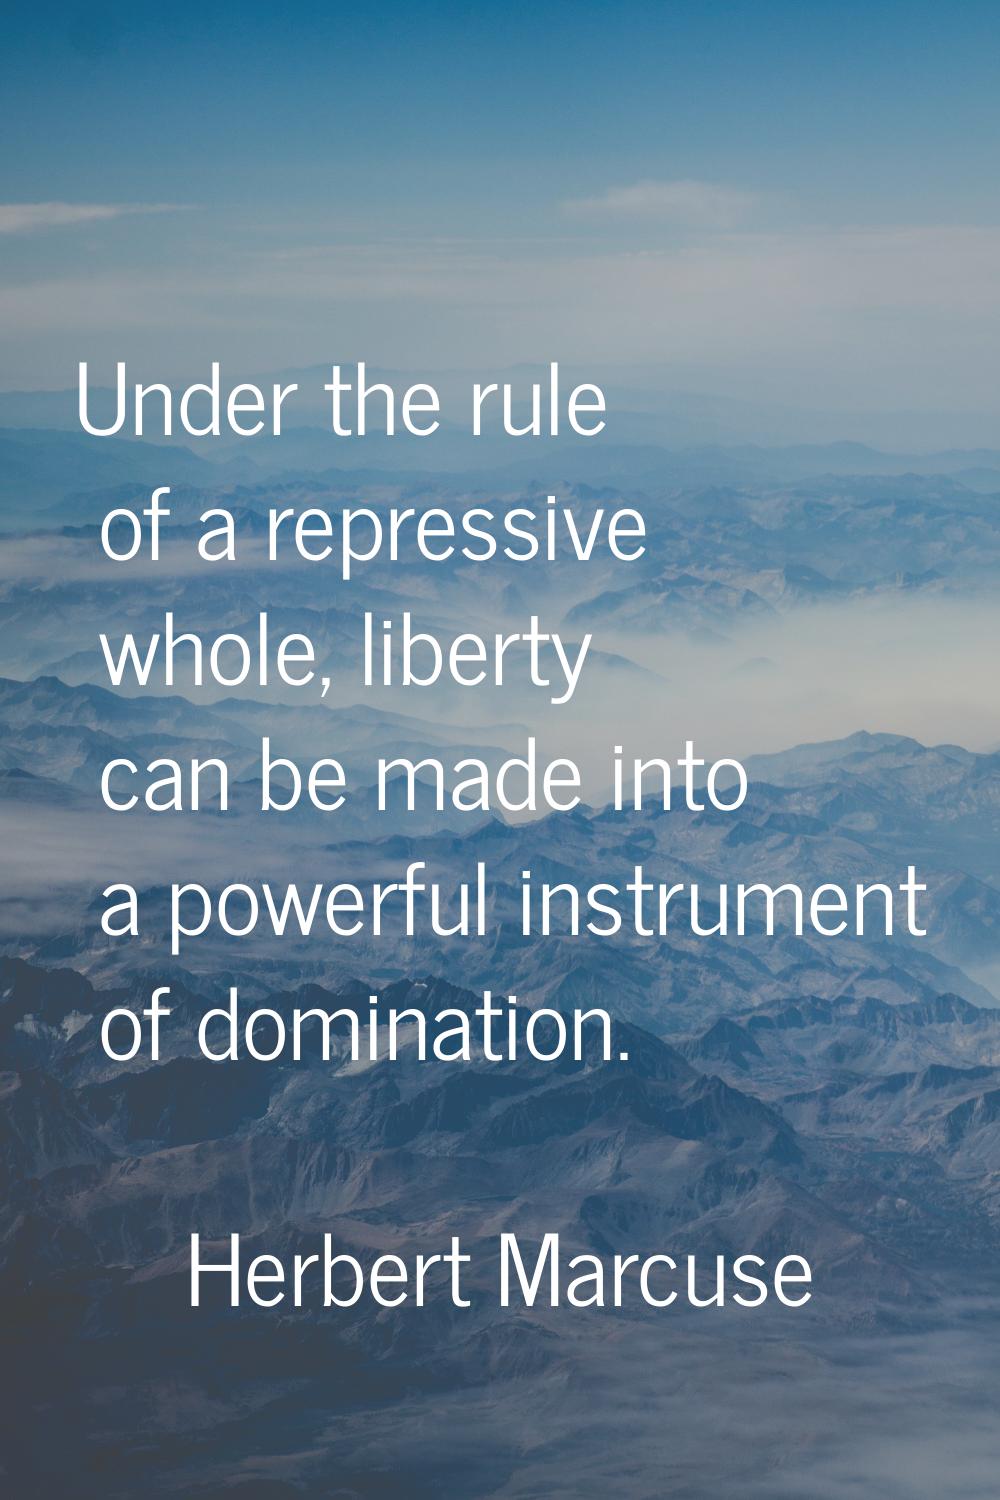 Under the rule of a repressive whole, liberty can be made into a powerful instrument of domination.